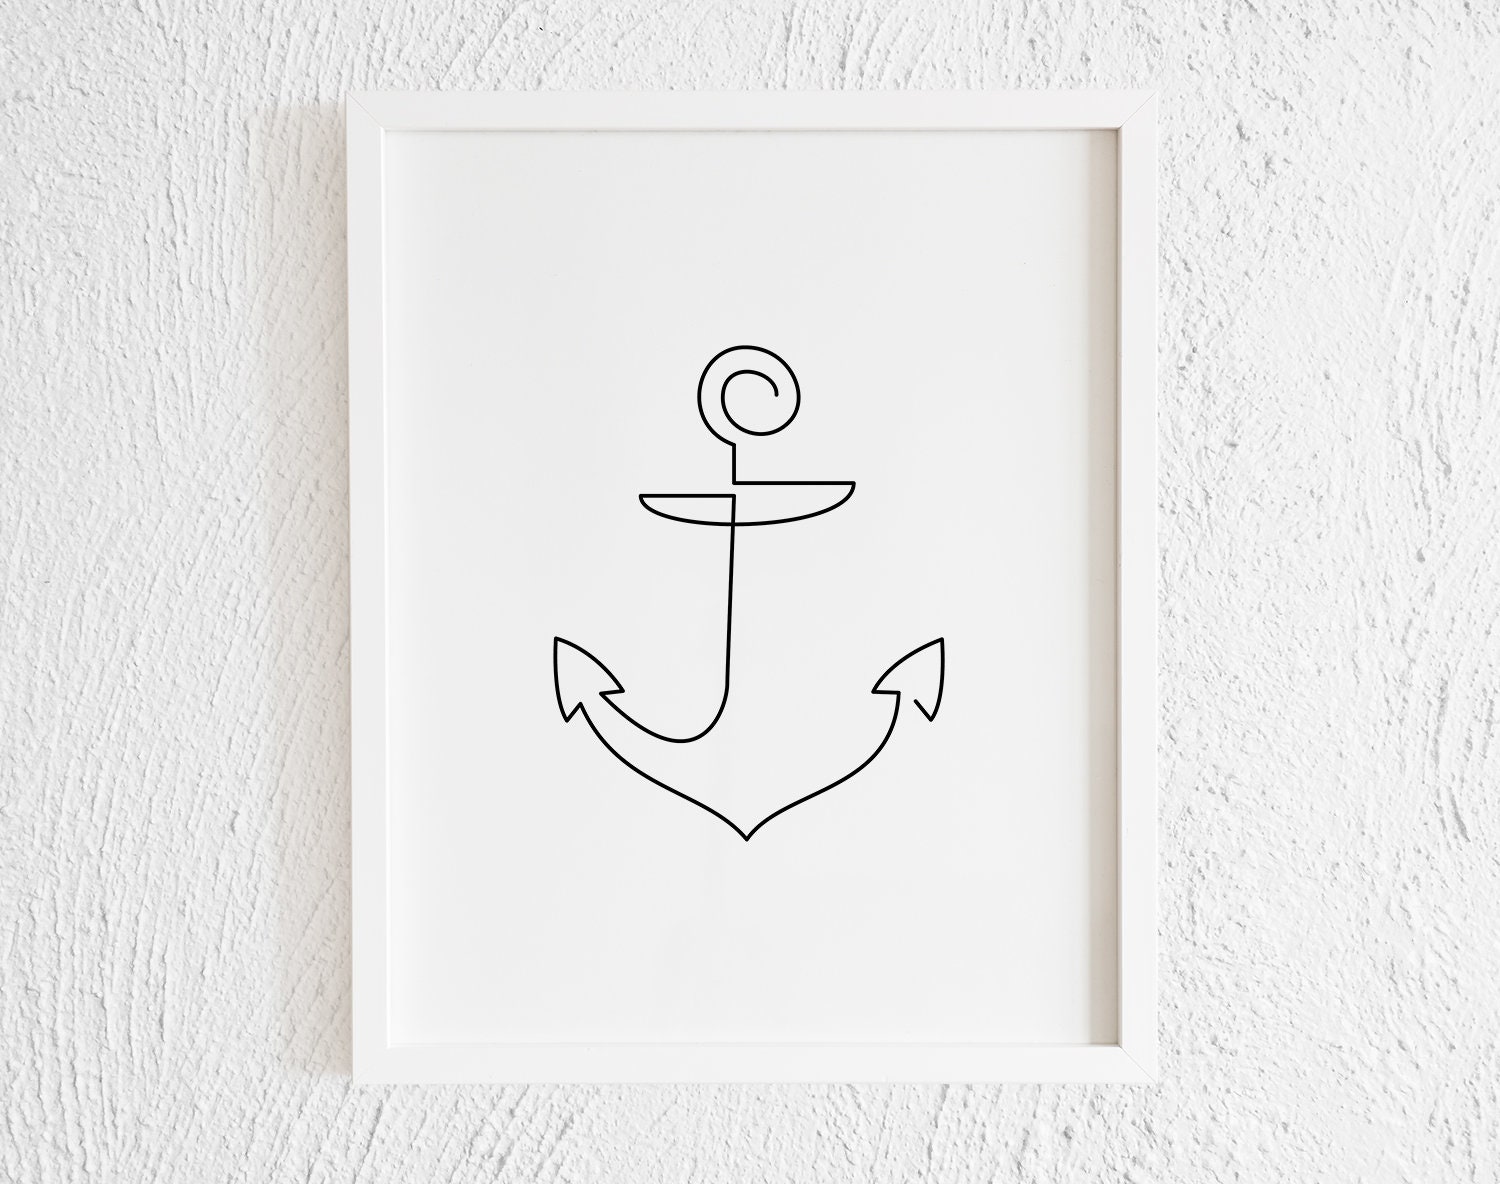 Anchor One Line Drawing Print. Printable Minimalist Iron Anchor Ship Doodle  Wall Decor. Modern Boat Gallery Wall Art. Instant Download 